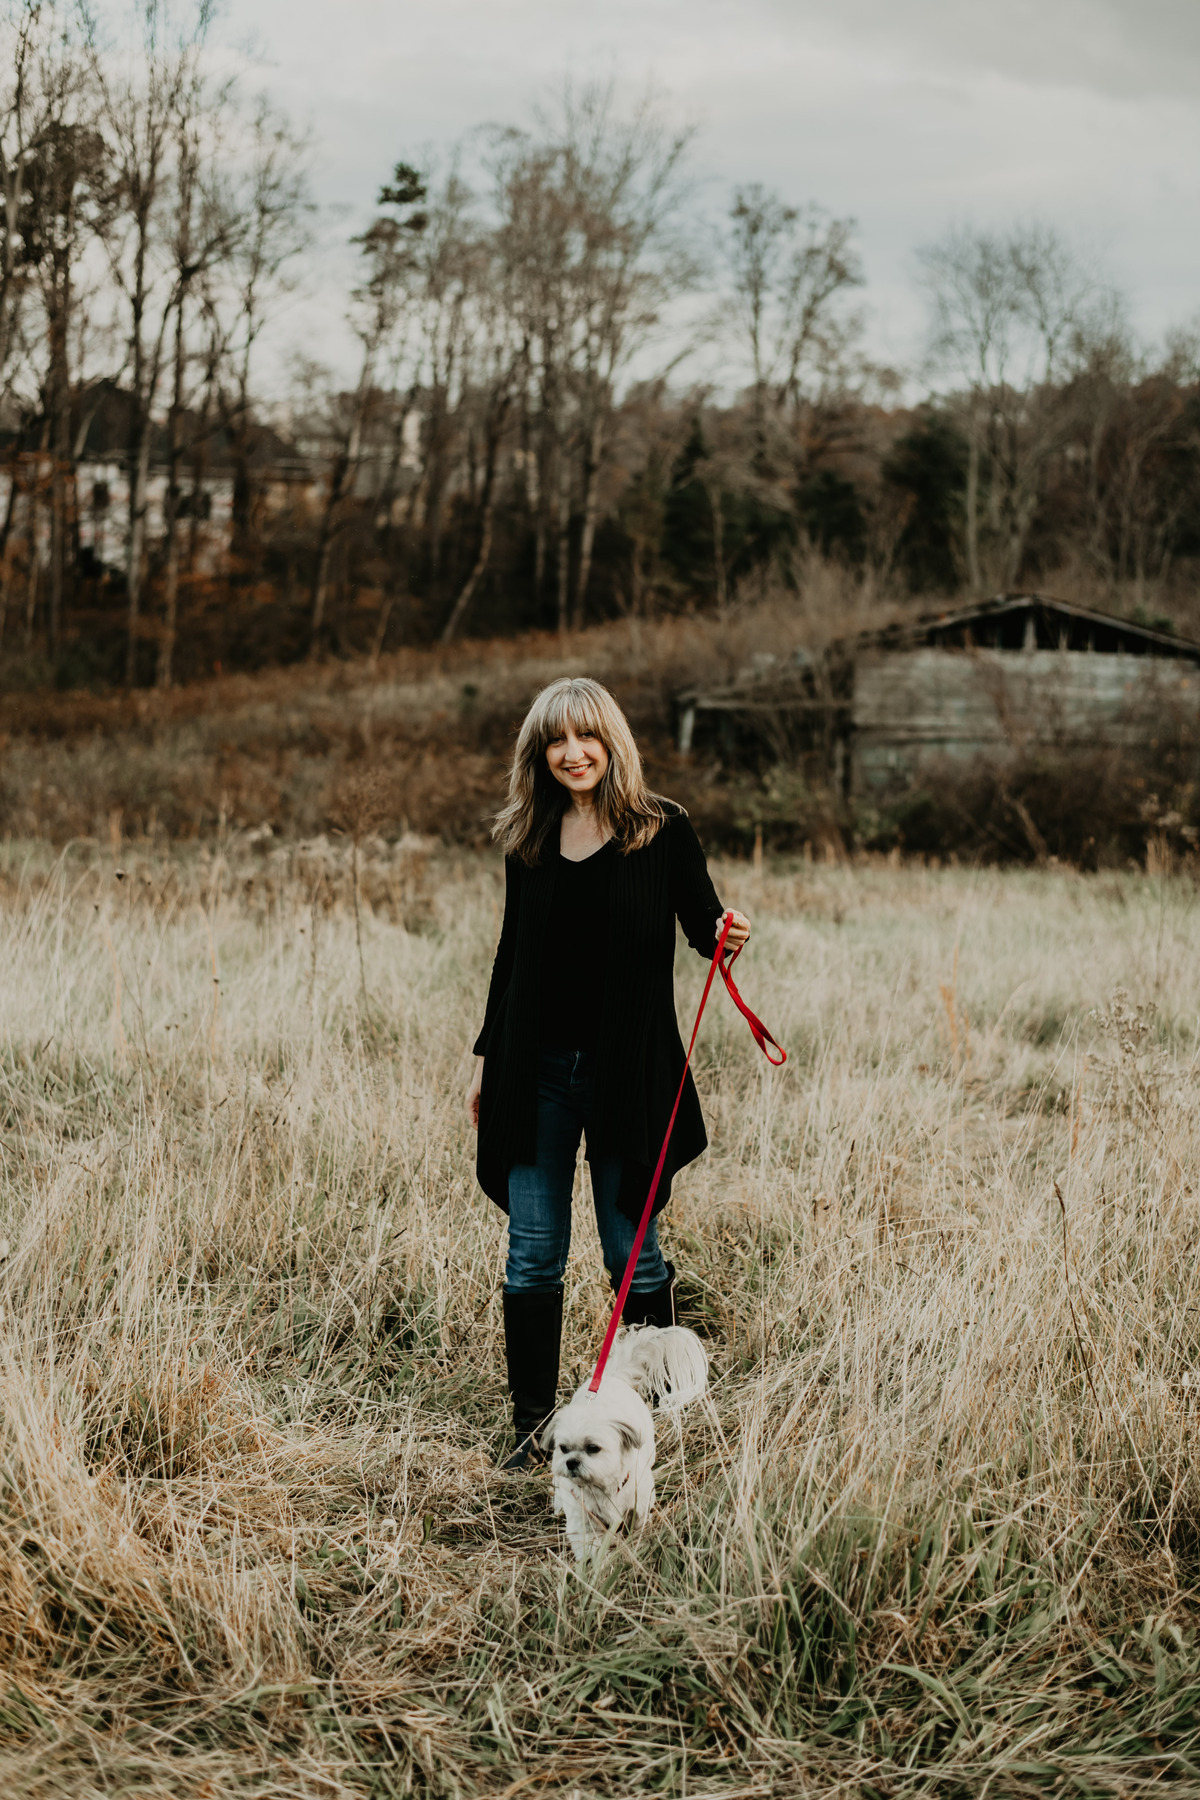 Deanna and Lucy enjoy some fresh air on a walk in Asheville, North Carolina.